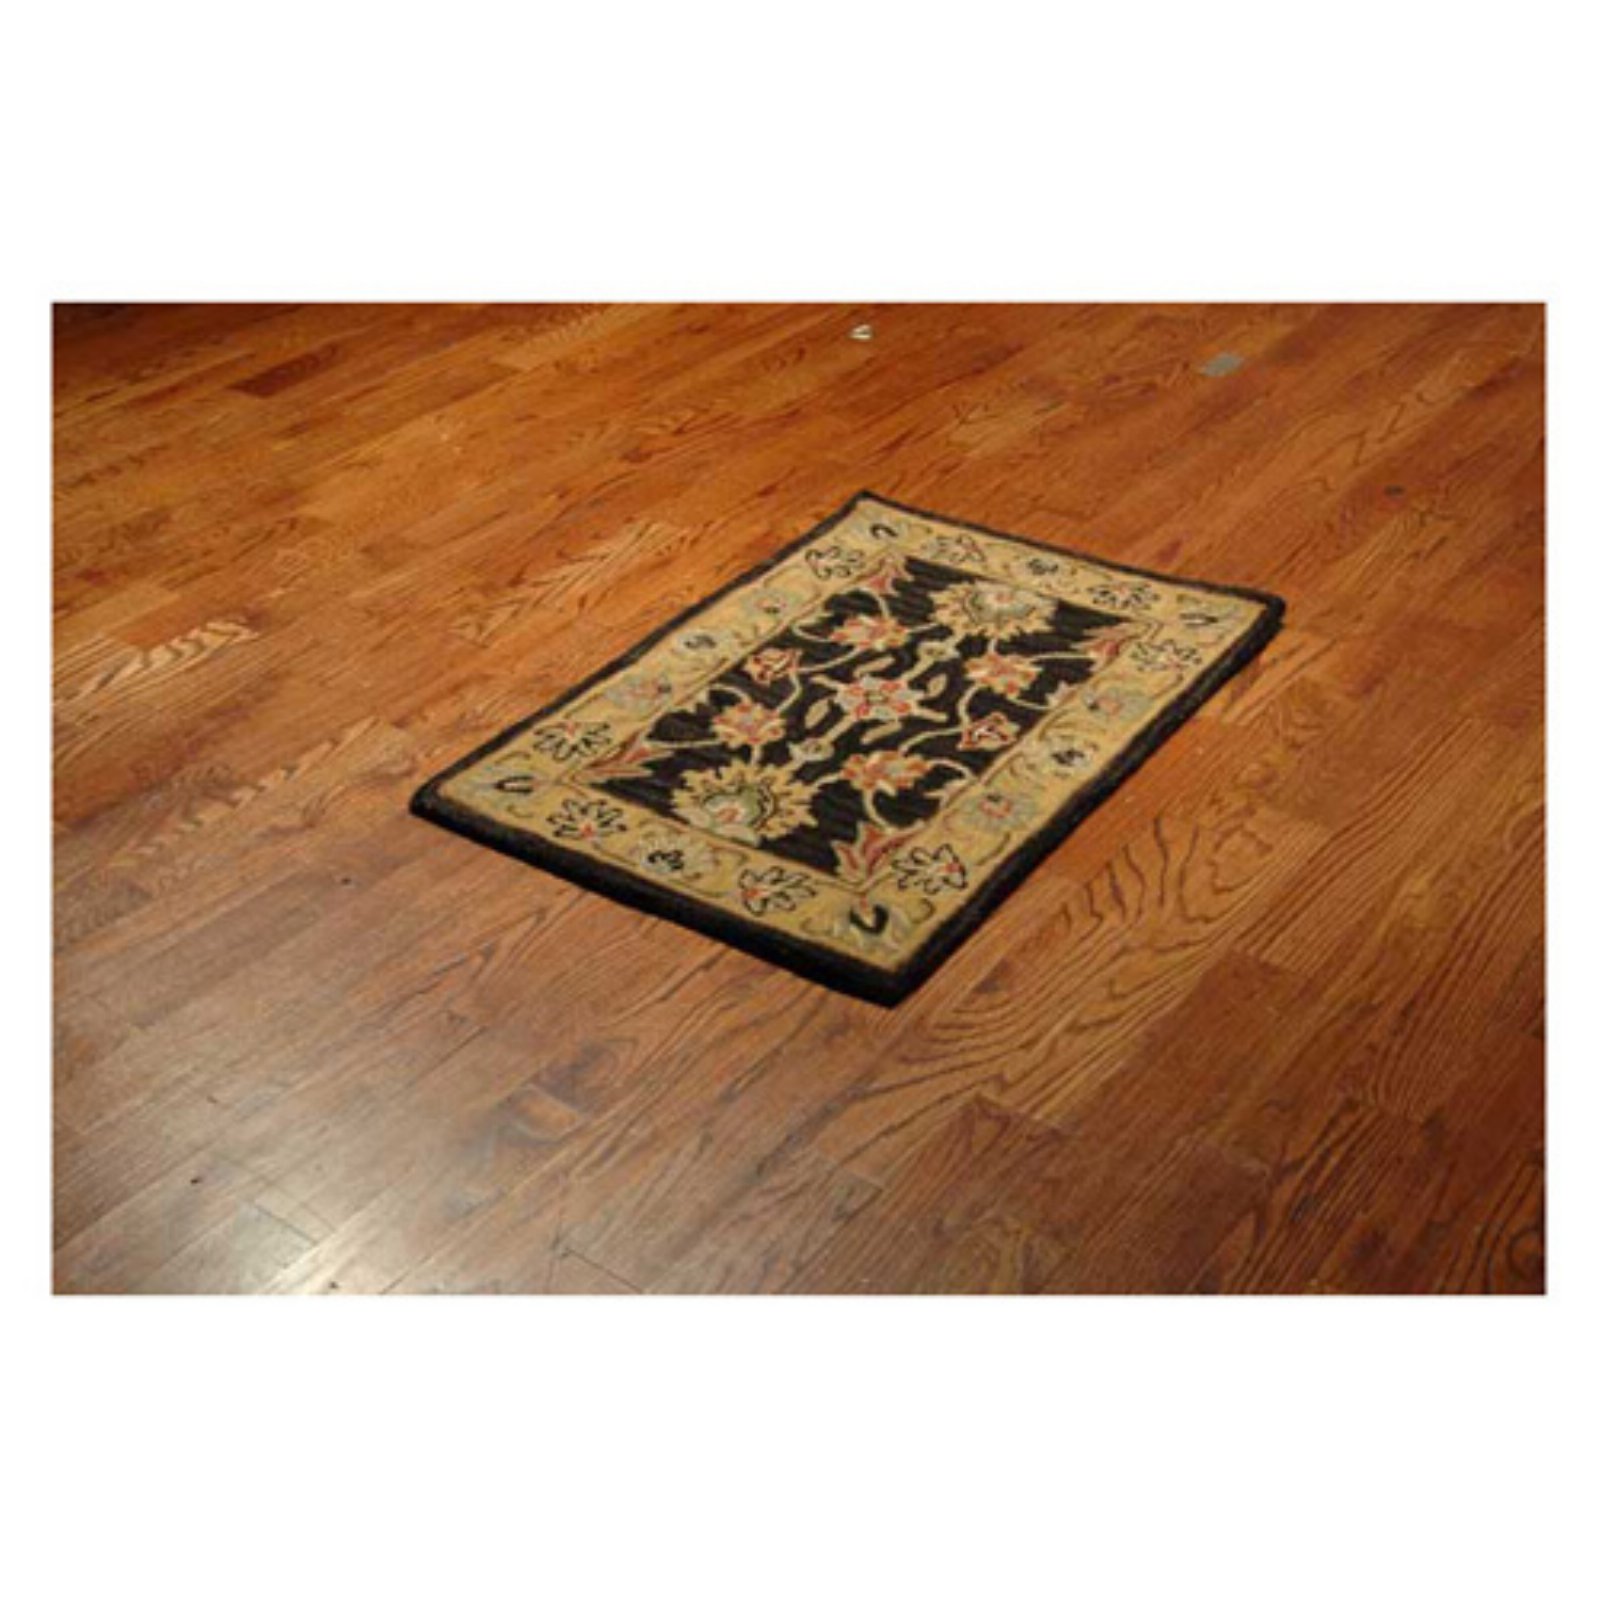 SAFAVIEH Heritage Regis Traditional Wool Area Rug, Charcoal/Gold, 7'6" x 9'6" - image 3 of 10